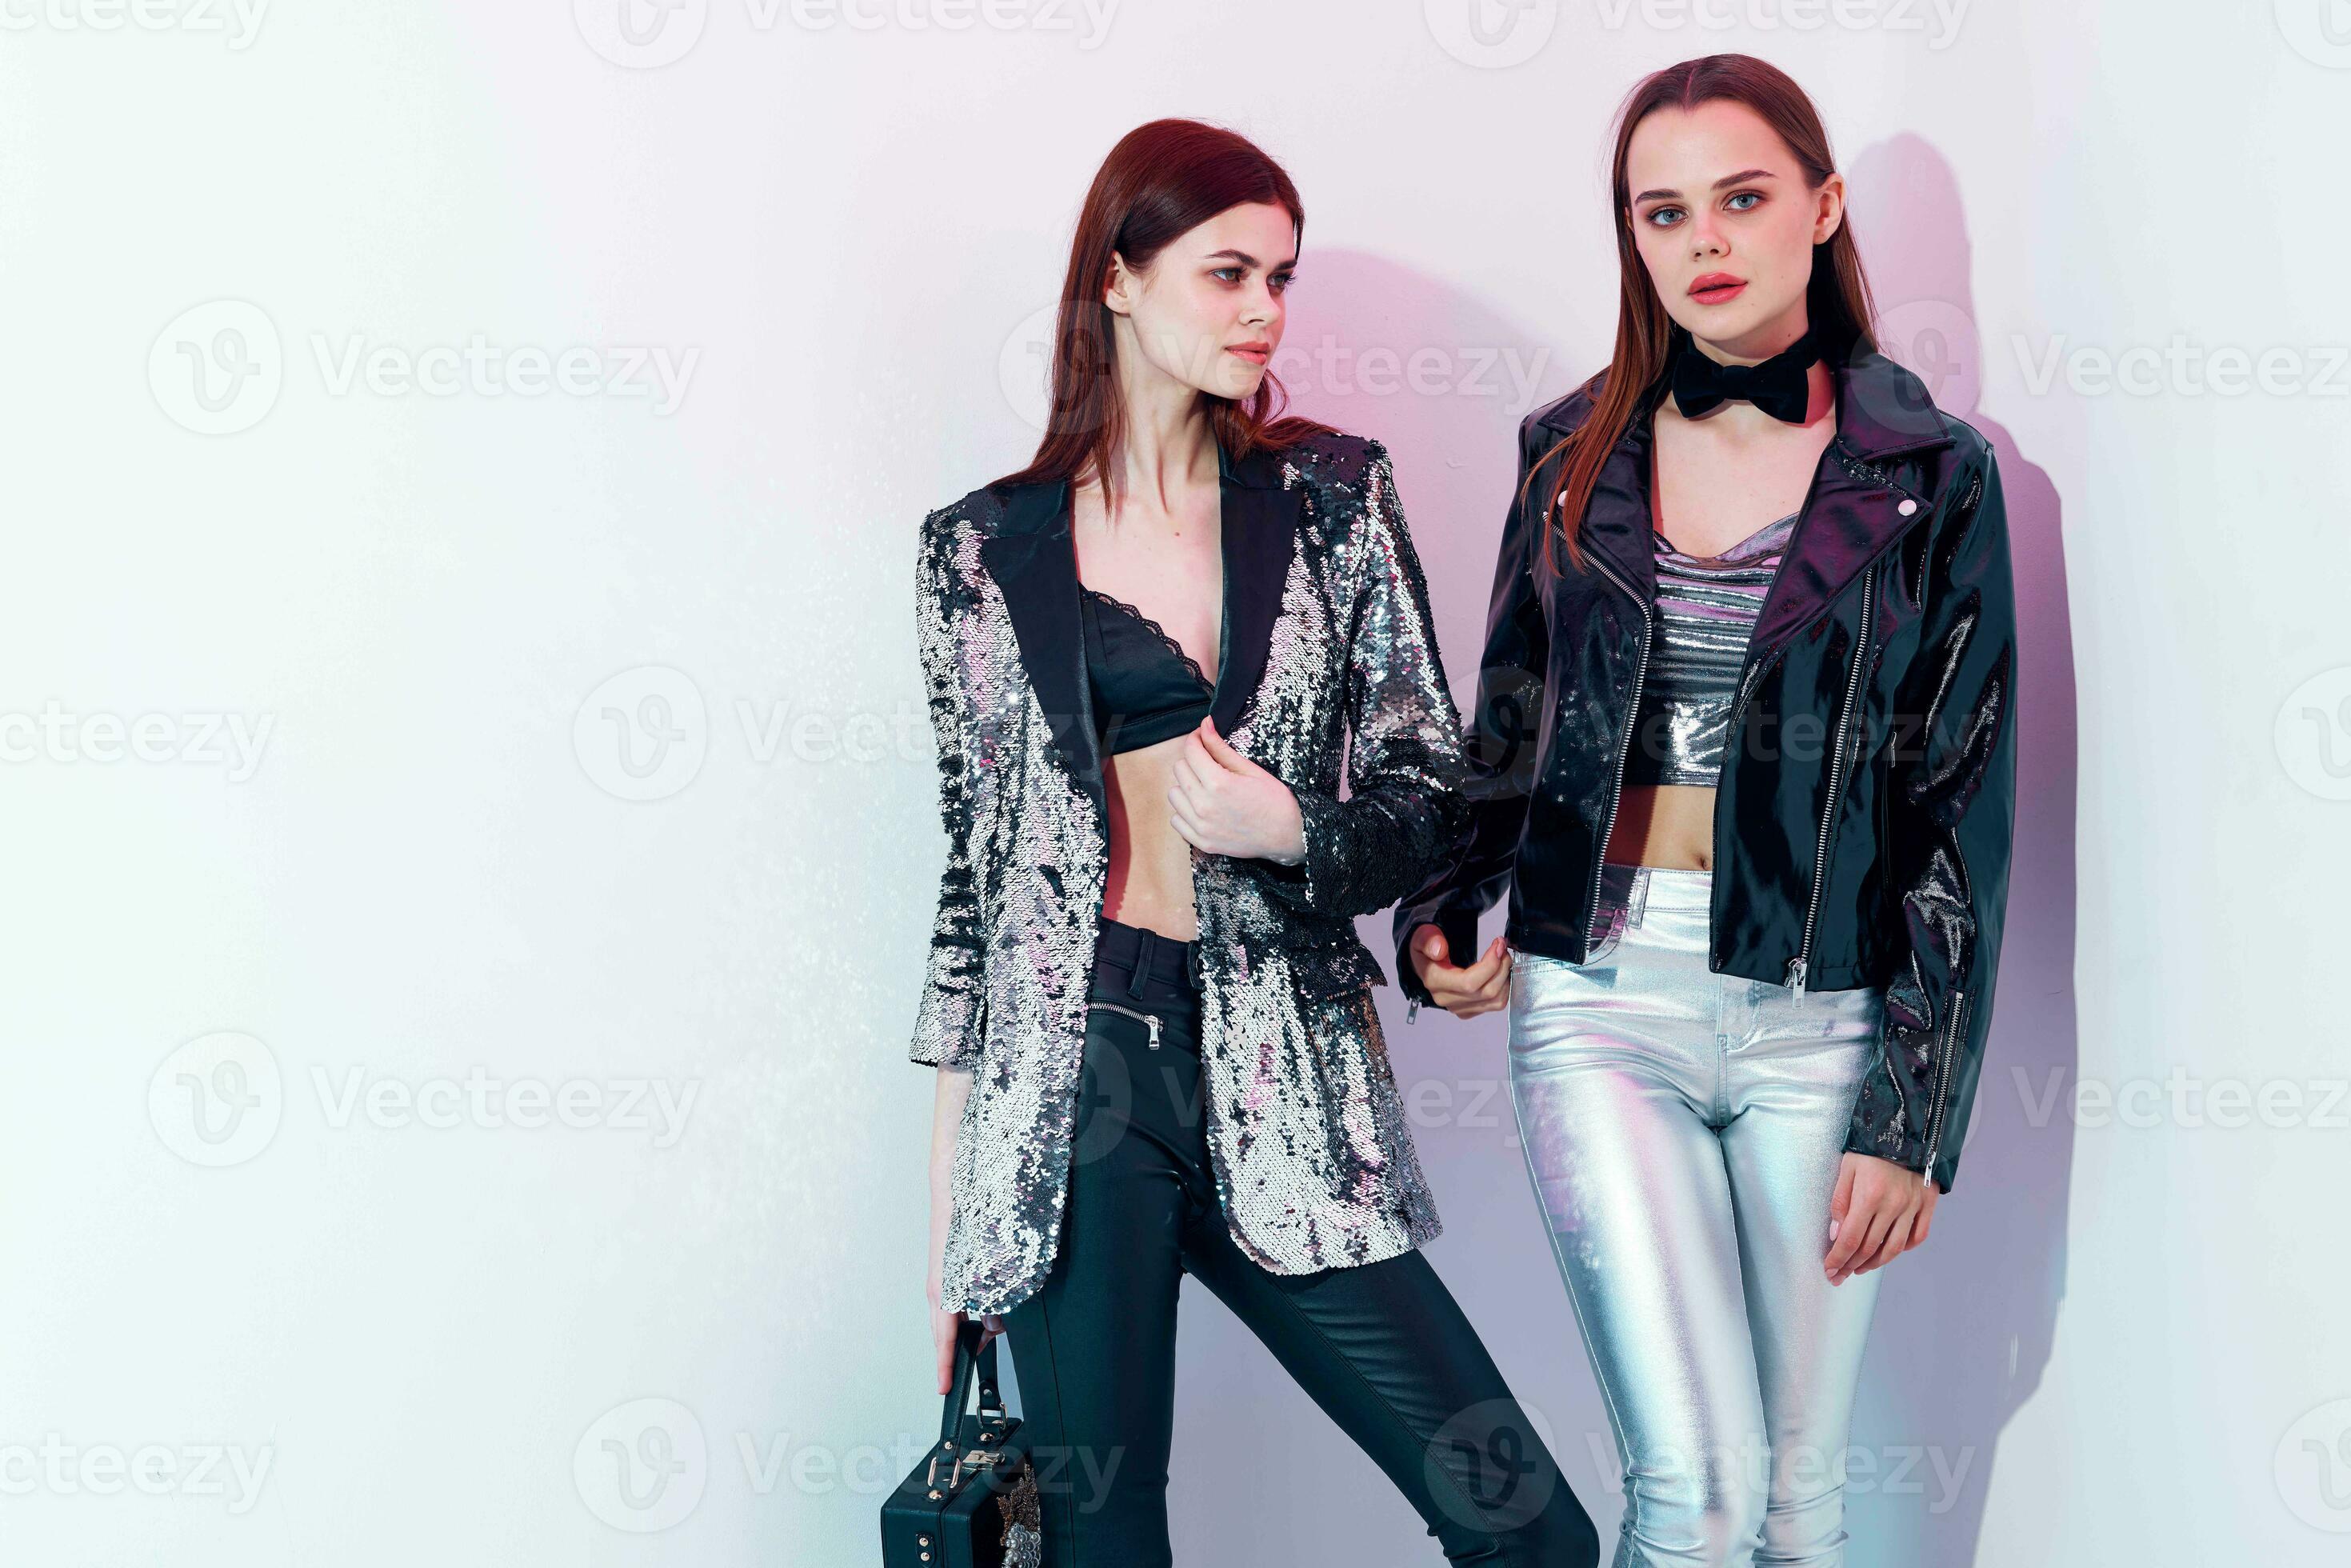 https://static.vecteezy.com/system/resources/previews/023/692/334/large_2x/two-trendy-women-in-modern-style-disco-clothing-photo.jpg